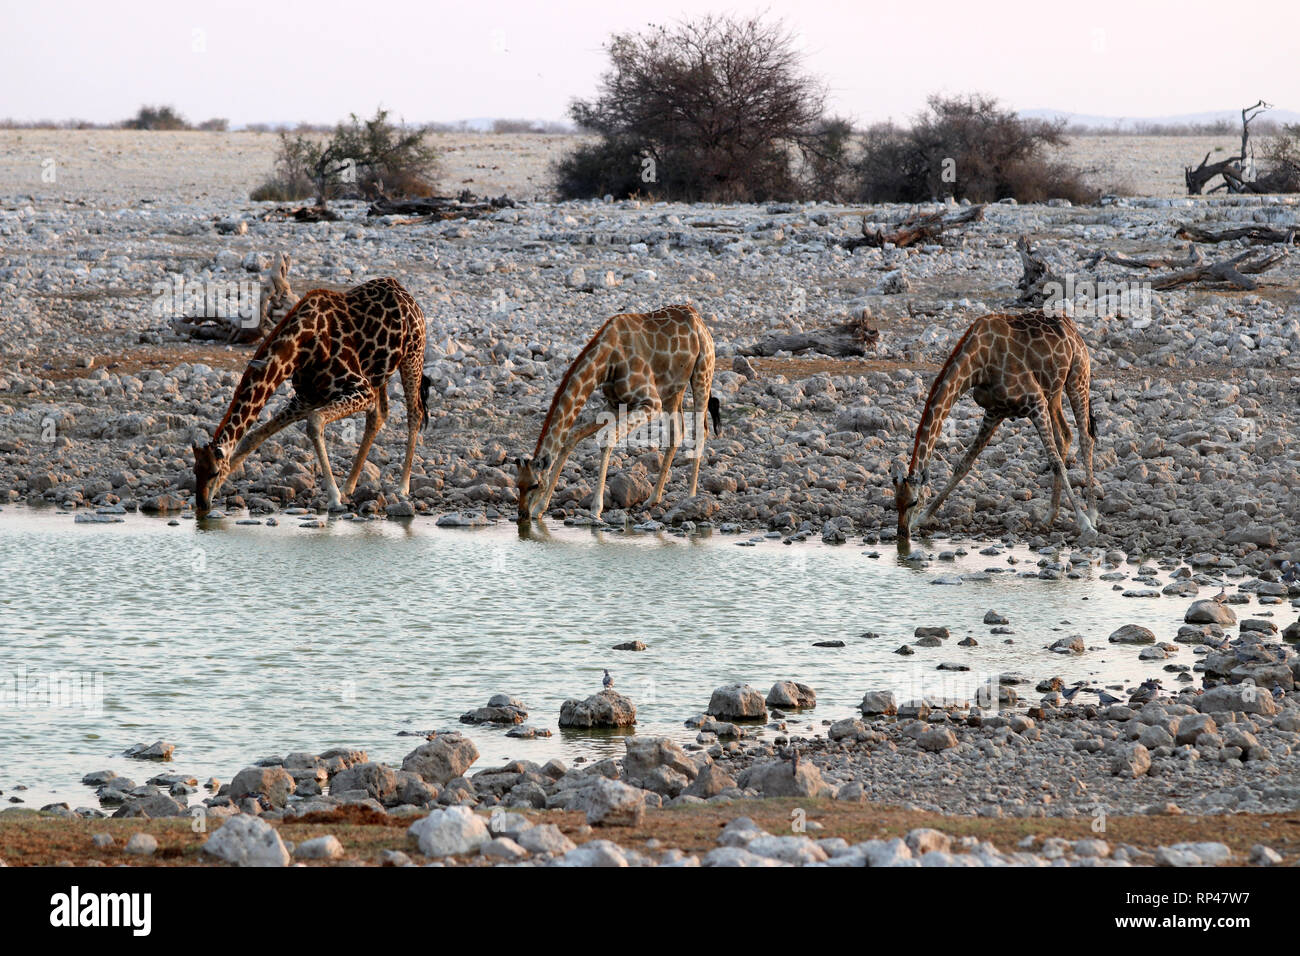 three giraffes and zebras at the waterhole - Namibia Africa Stock Photo